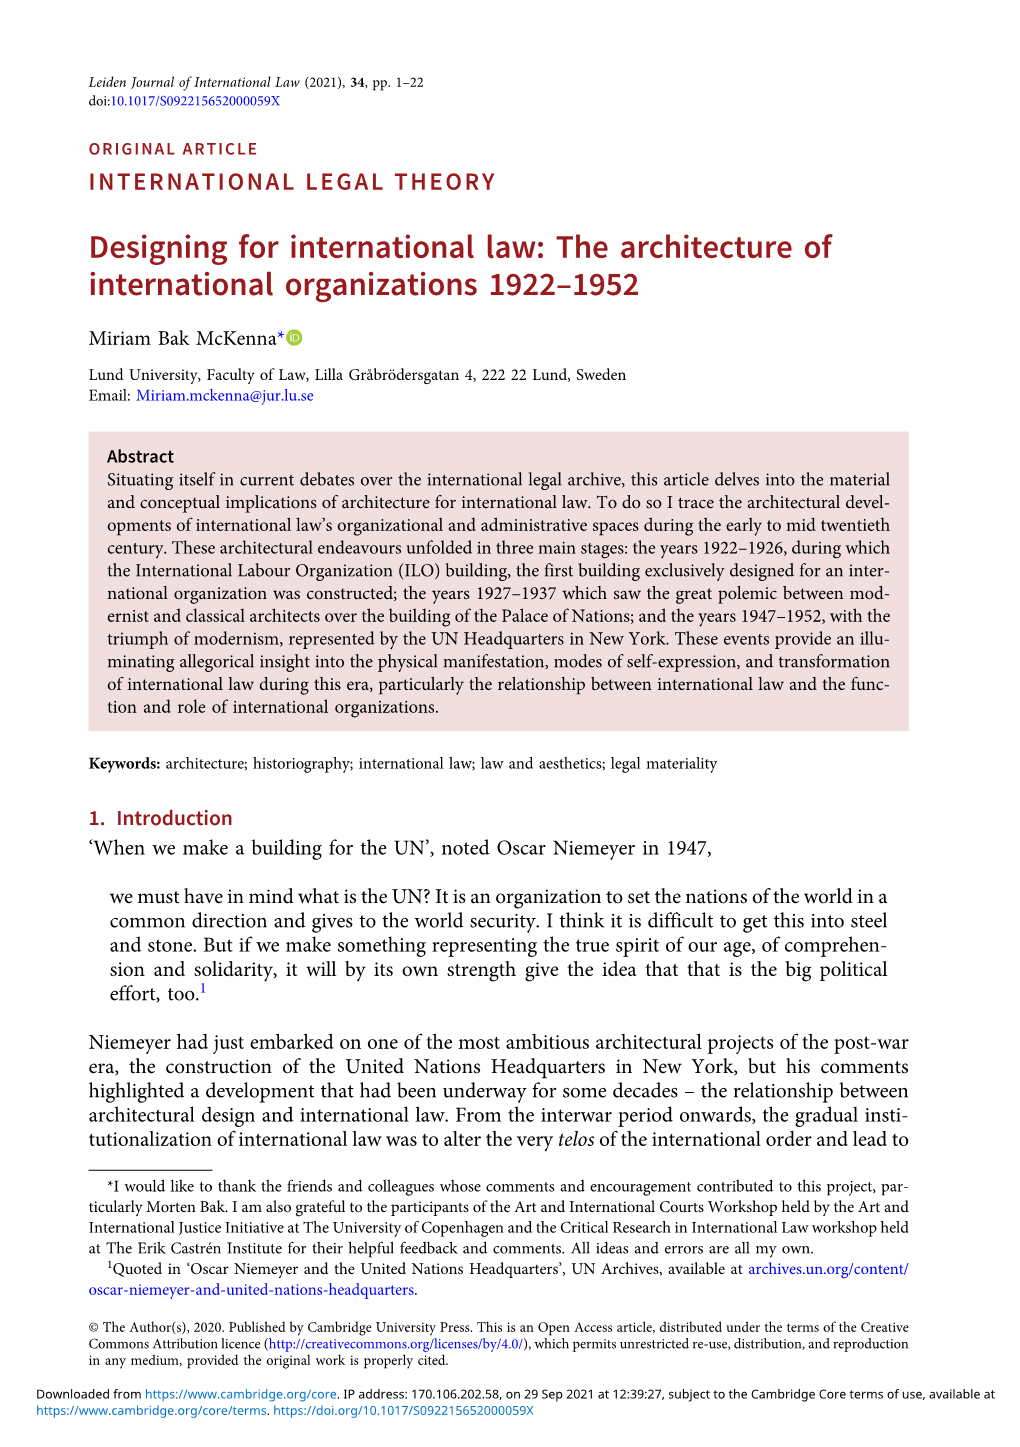 Designing for International Law: the Architecture of International Organizations 1922–1952